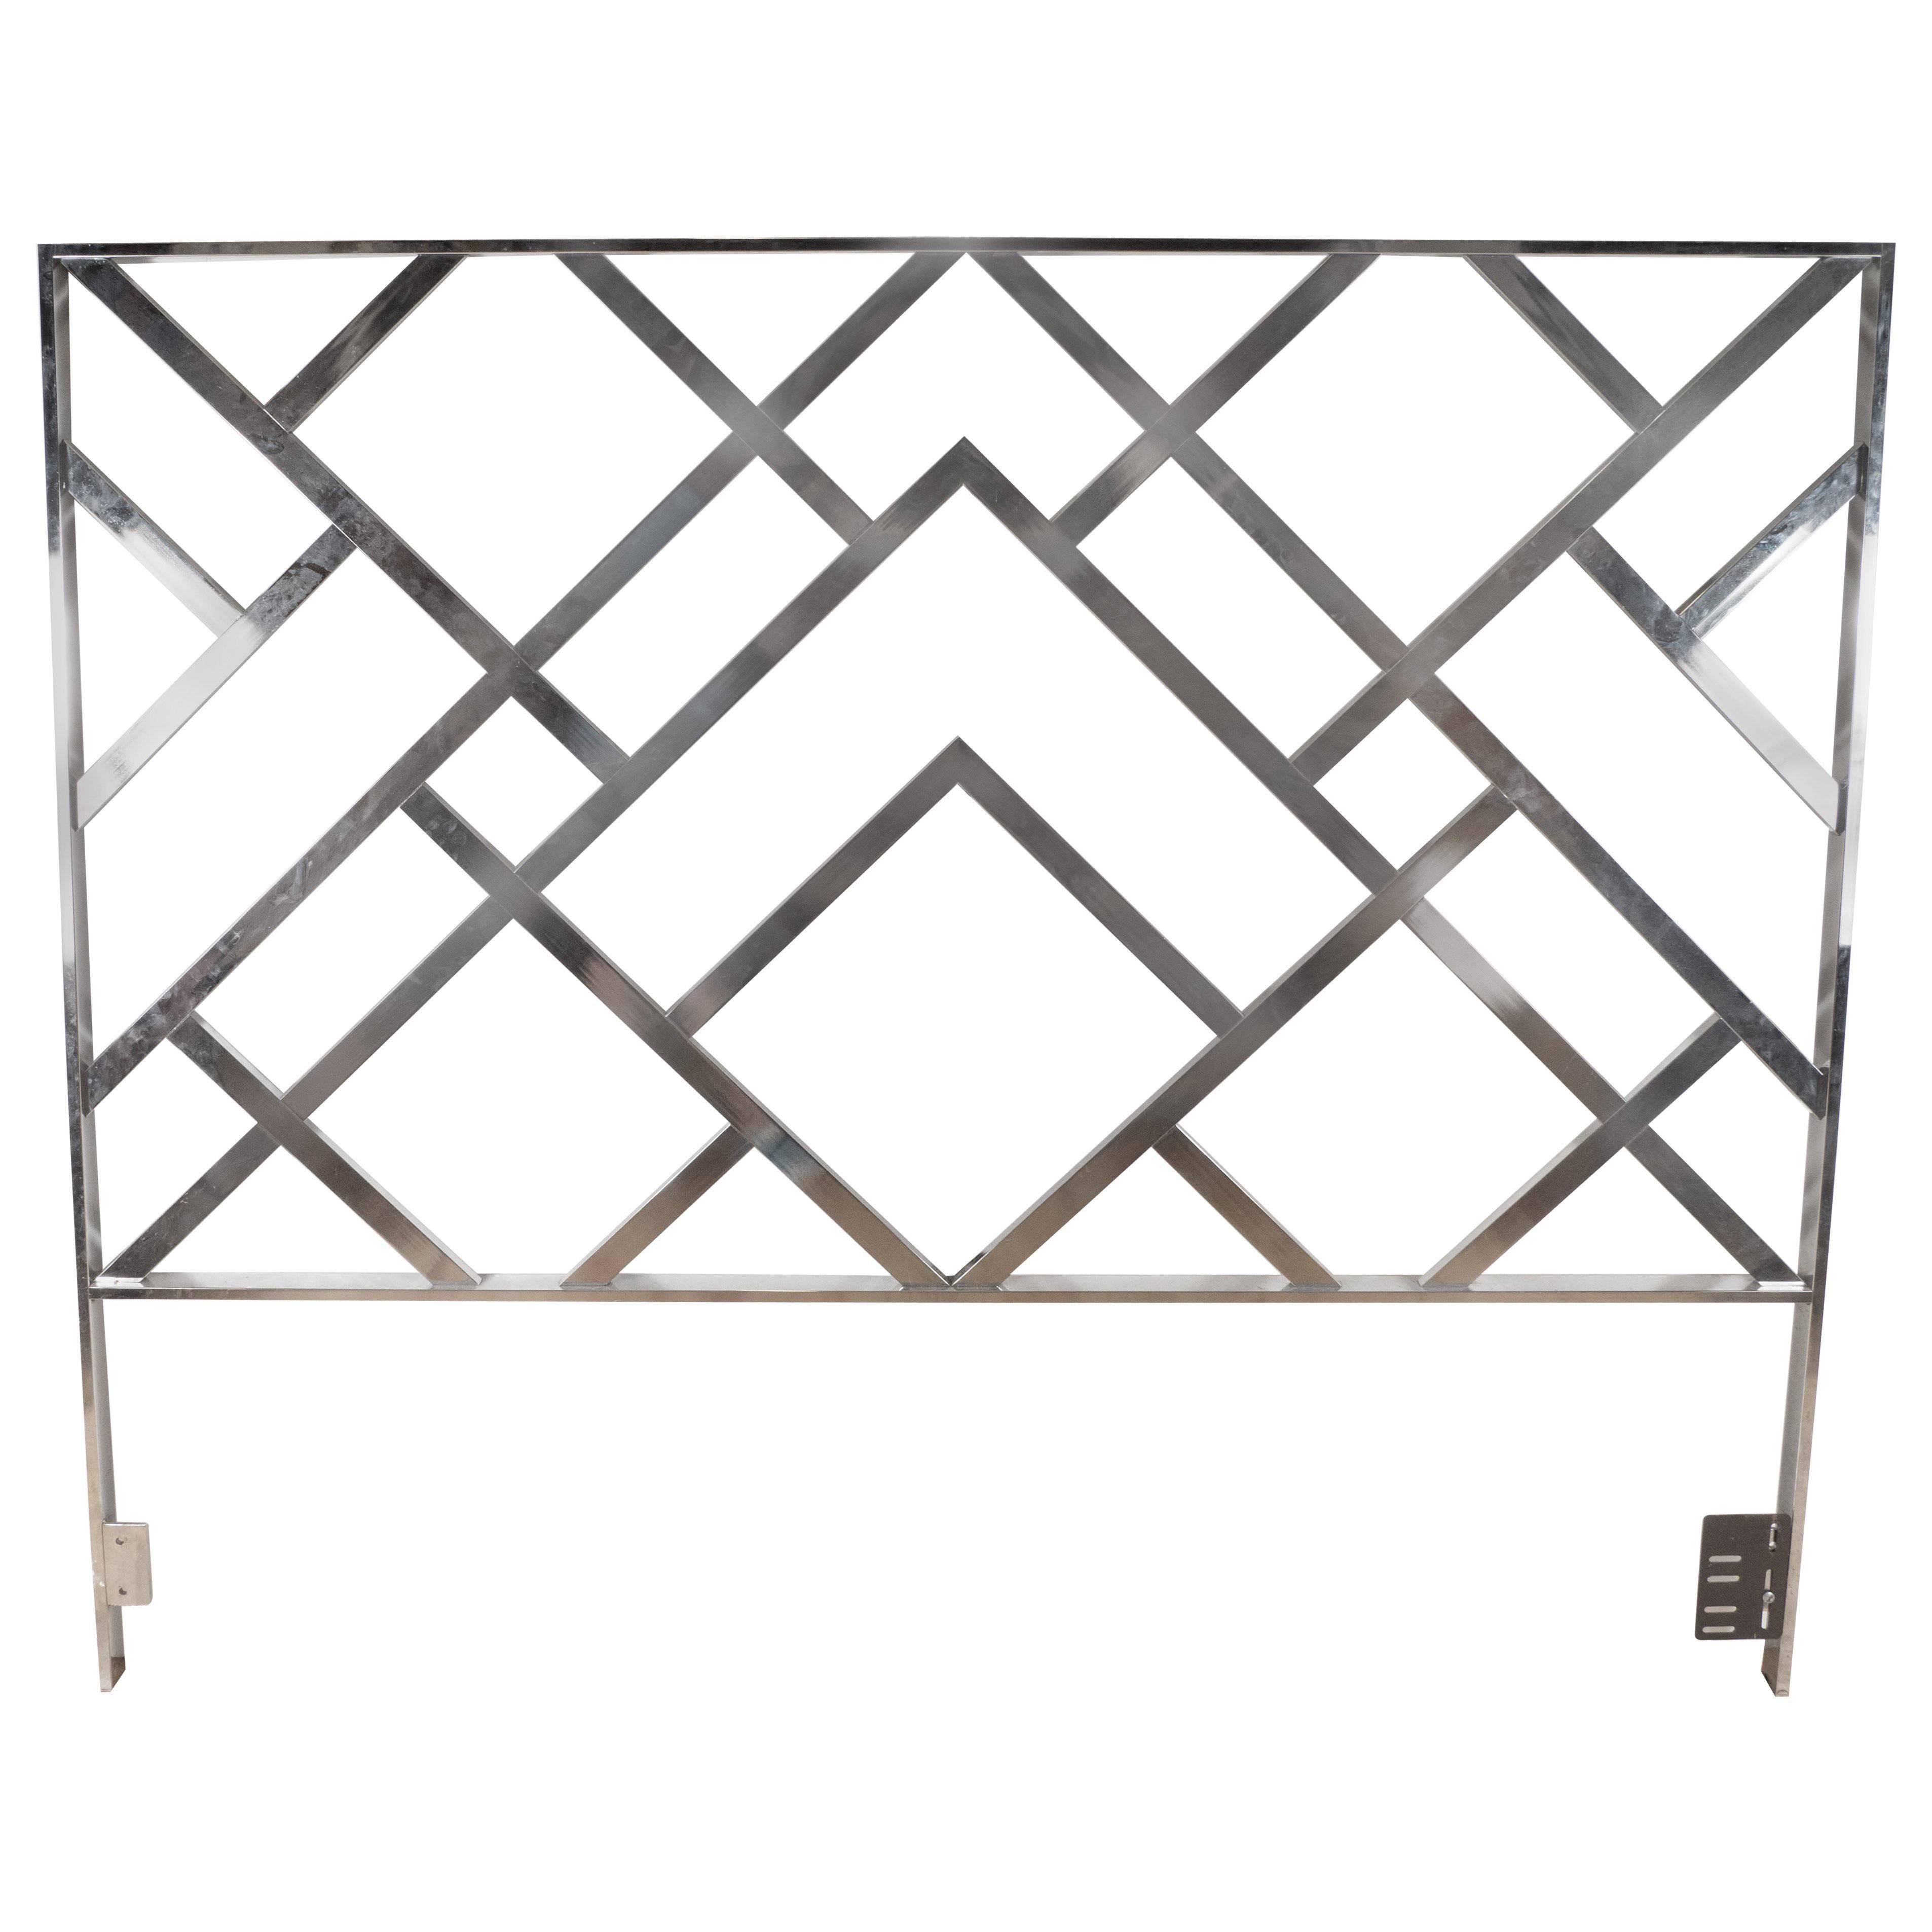 Mid-Century Modernist Chrome King-Size Headboard in the Style of Milo Baughman